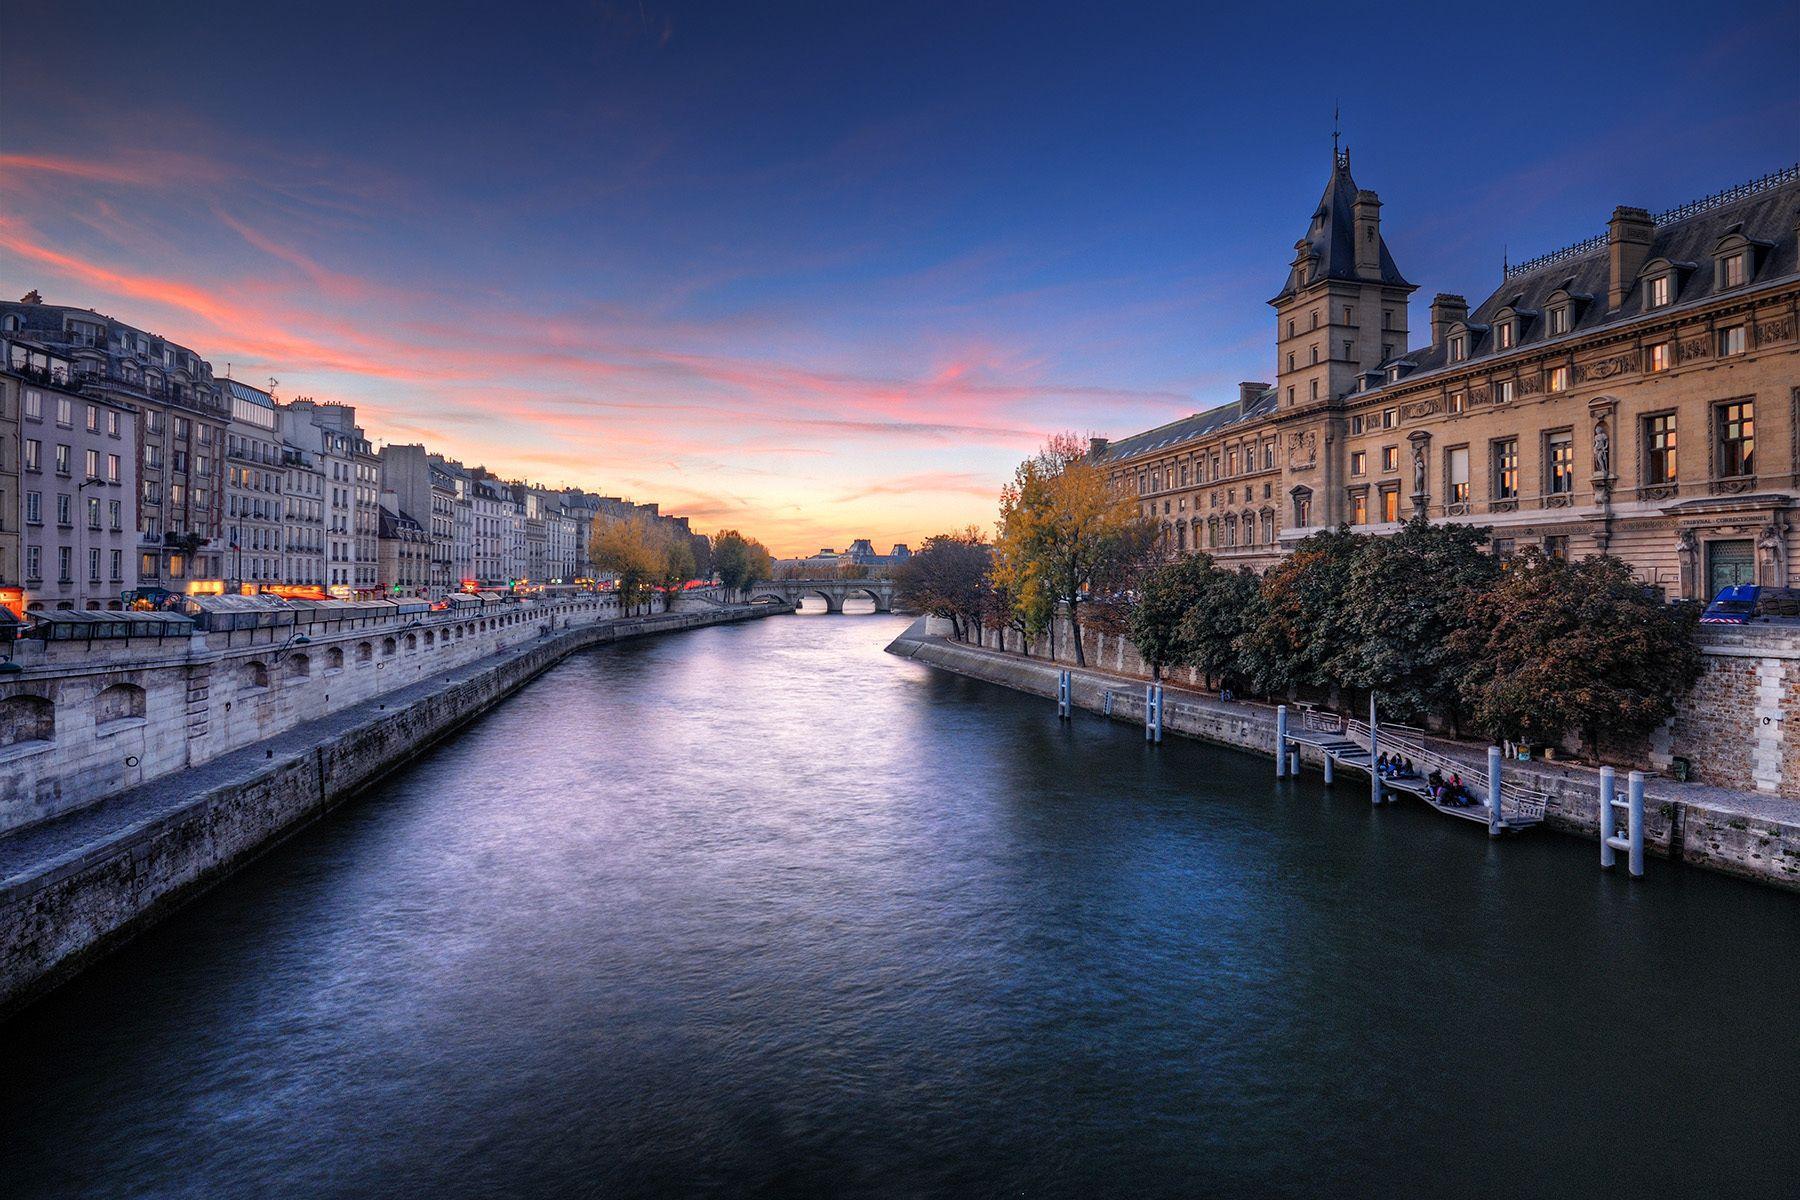 HD Seine River Wallpaper and Photo. HD Travelling Wallpaper